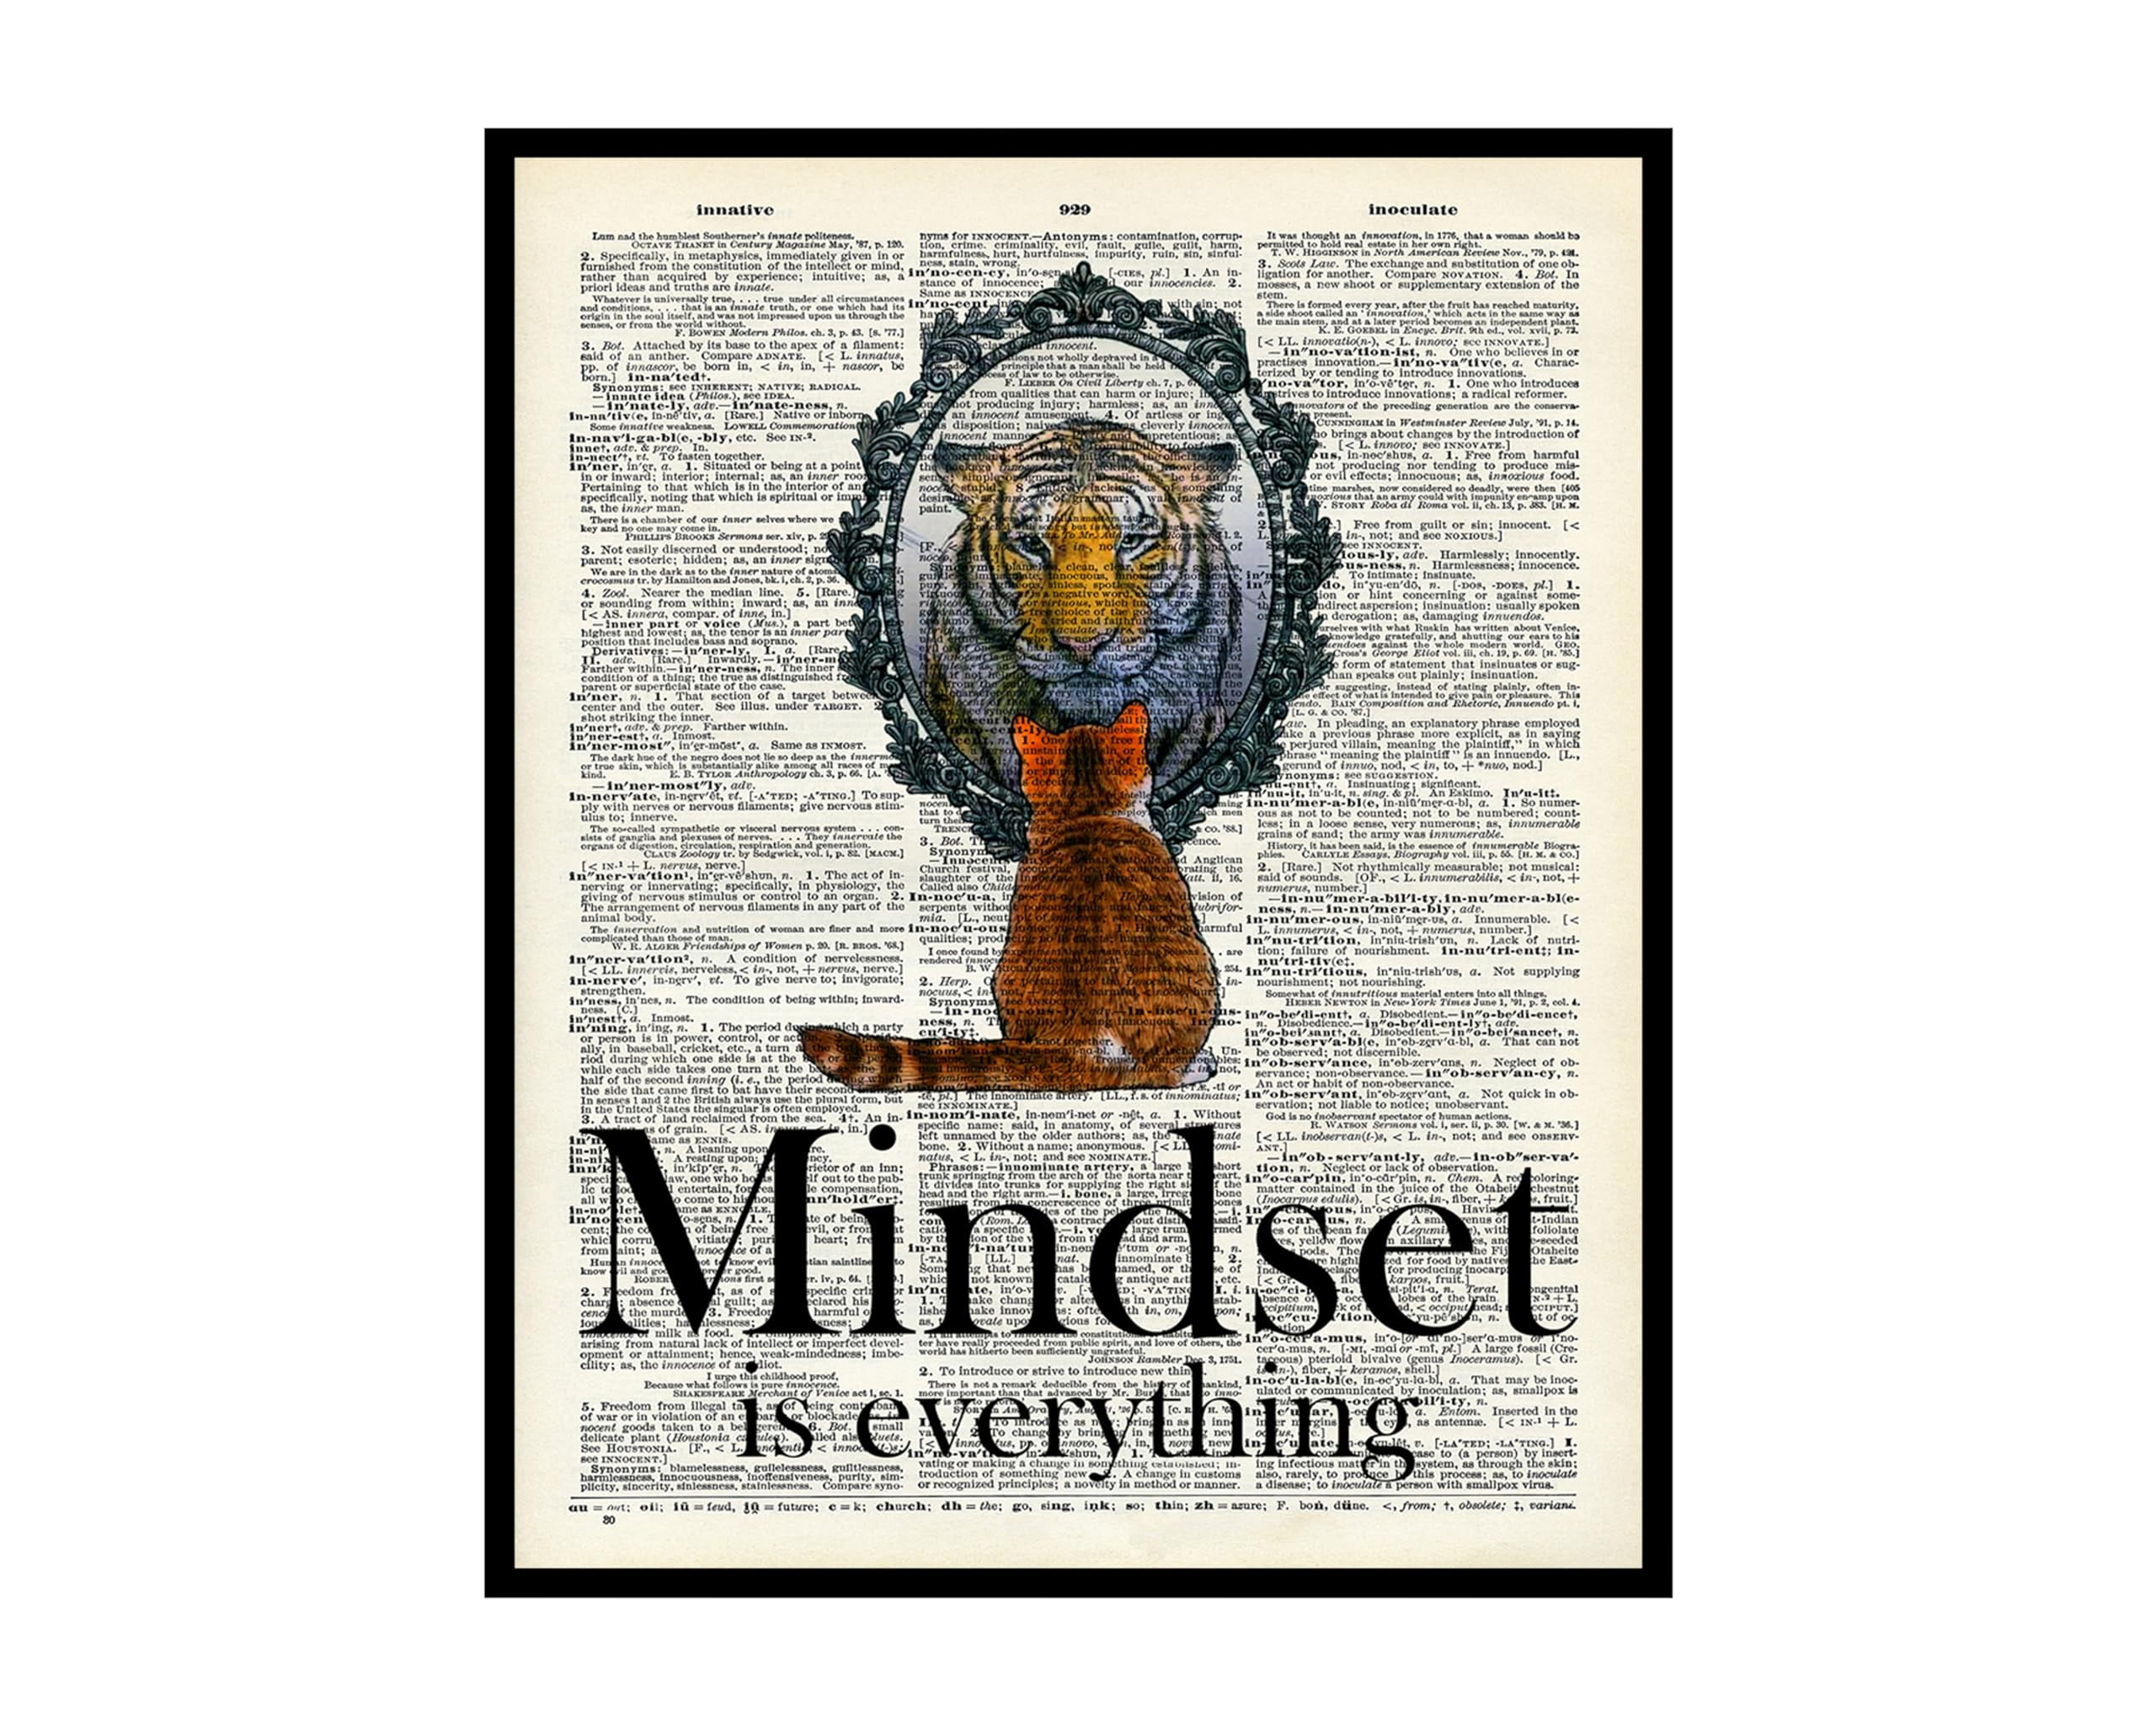 Cat Mindset is Everything Poster, Cat Wall Art, Cat Poster Print